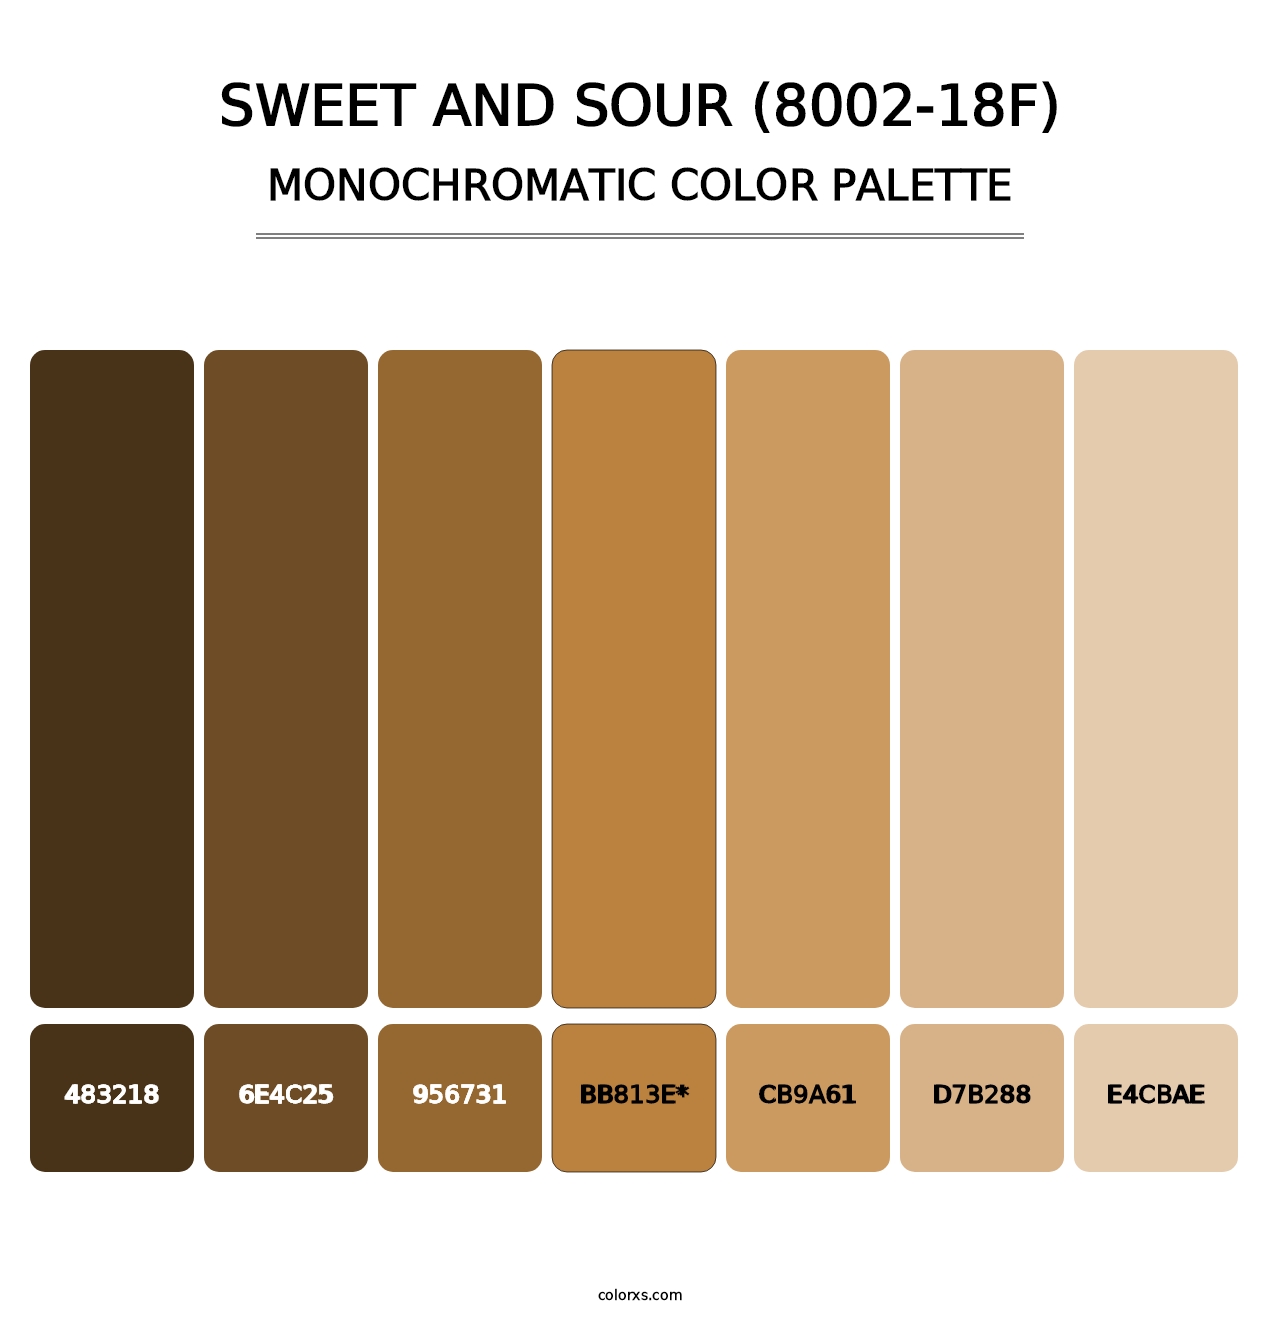 Sweet and Sour (8002-18F) - Monochromatic Color Palette